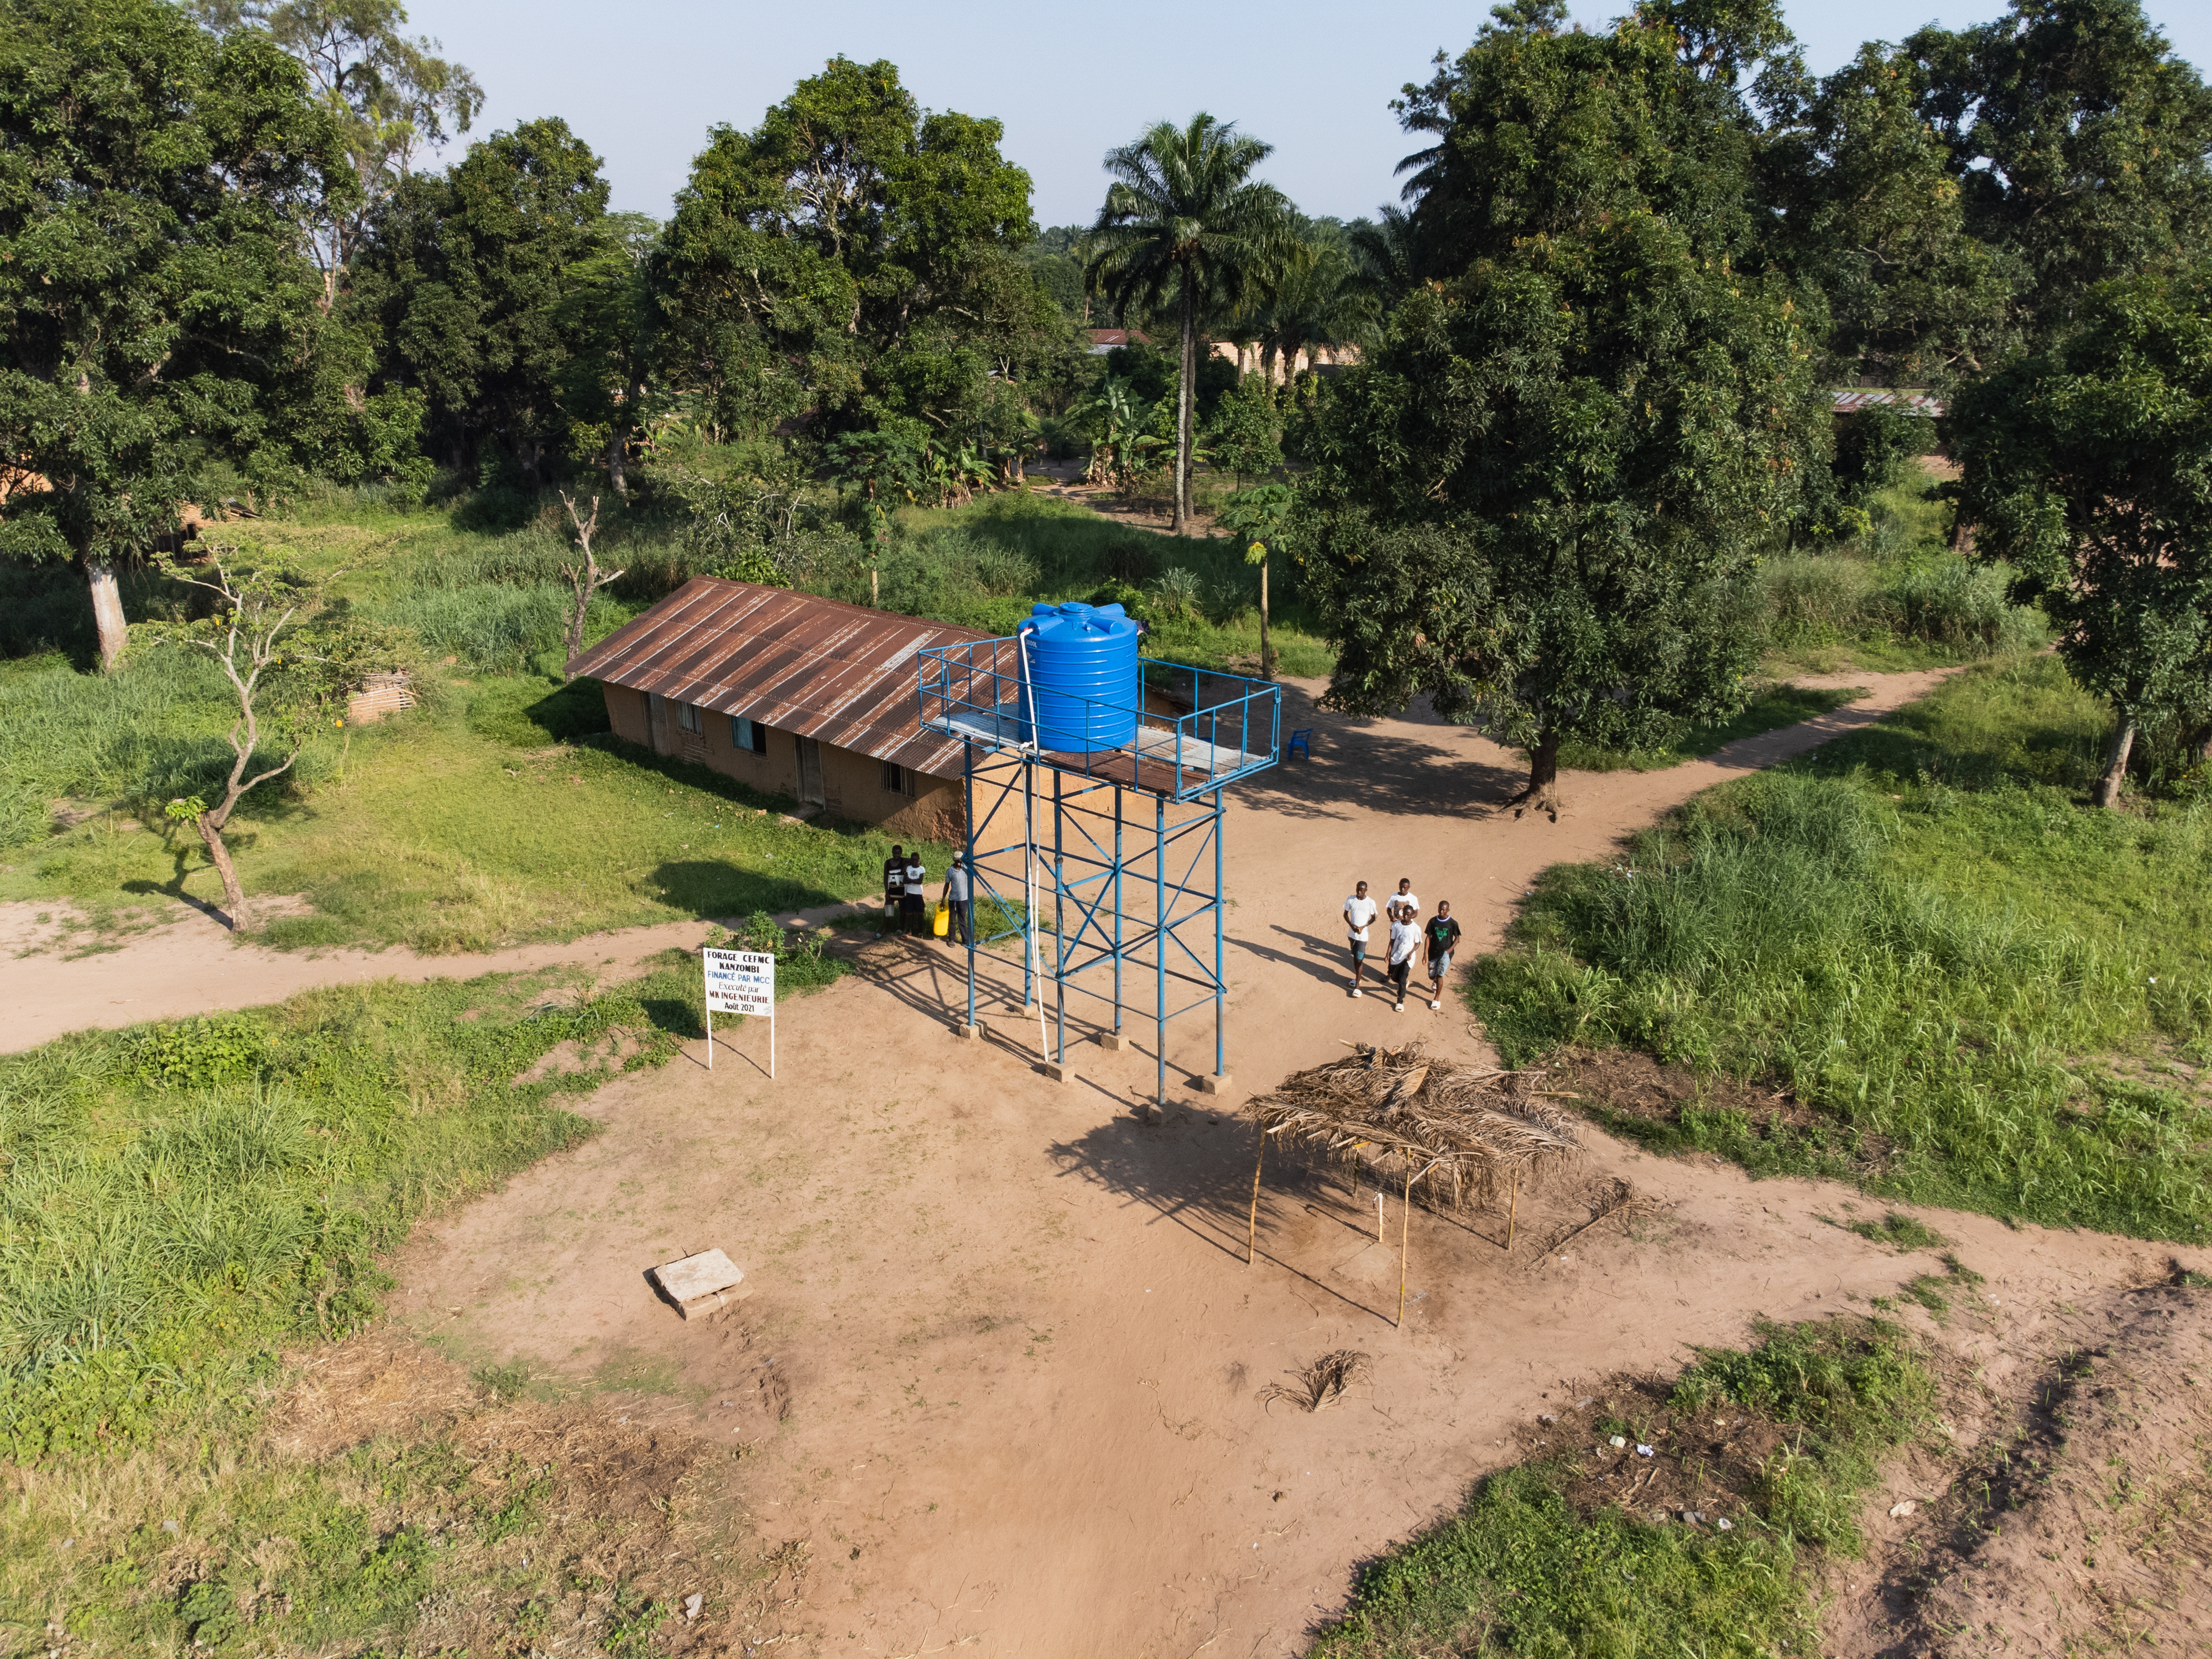 This borehole pictured shows all parts of the finished borehole after it is drilled. The Blue tank holds water that the pump pulls from the borehole. The spicket itself is underneath the shadded grass roof next to the blue tank tower. You can see by the paths leading to the borehole that it serves the community from all directions where people are coming for water here.